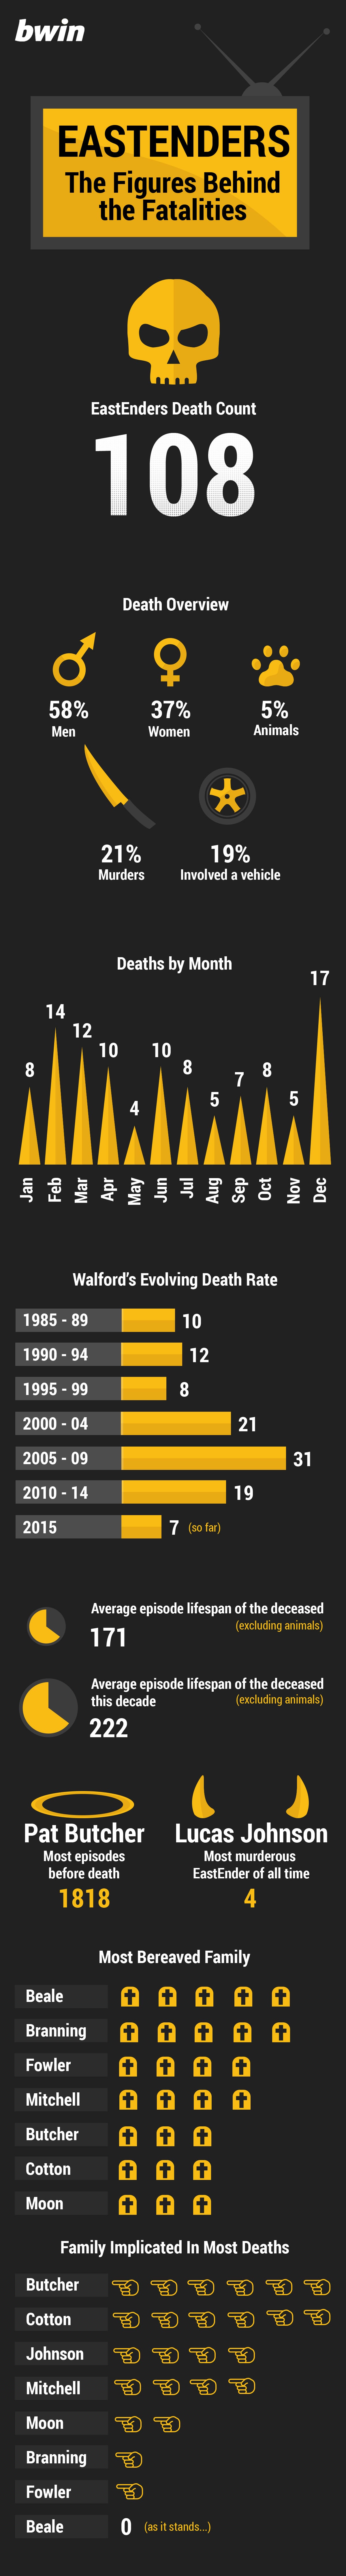 A history of death in EastEnders infographic